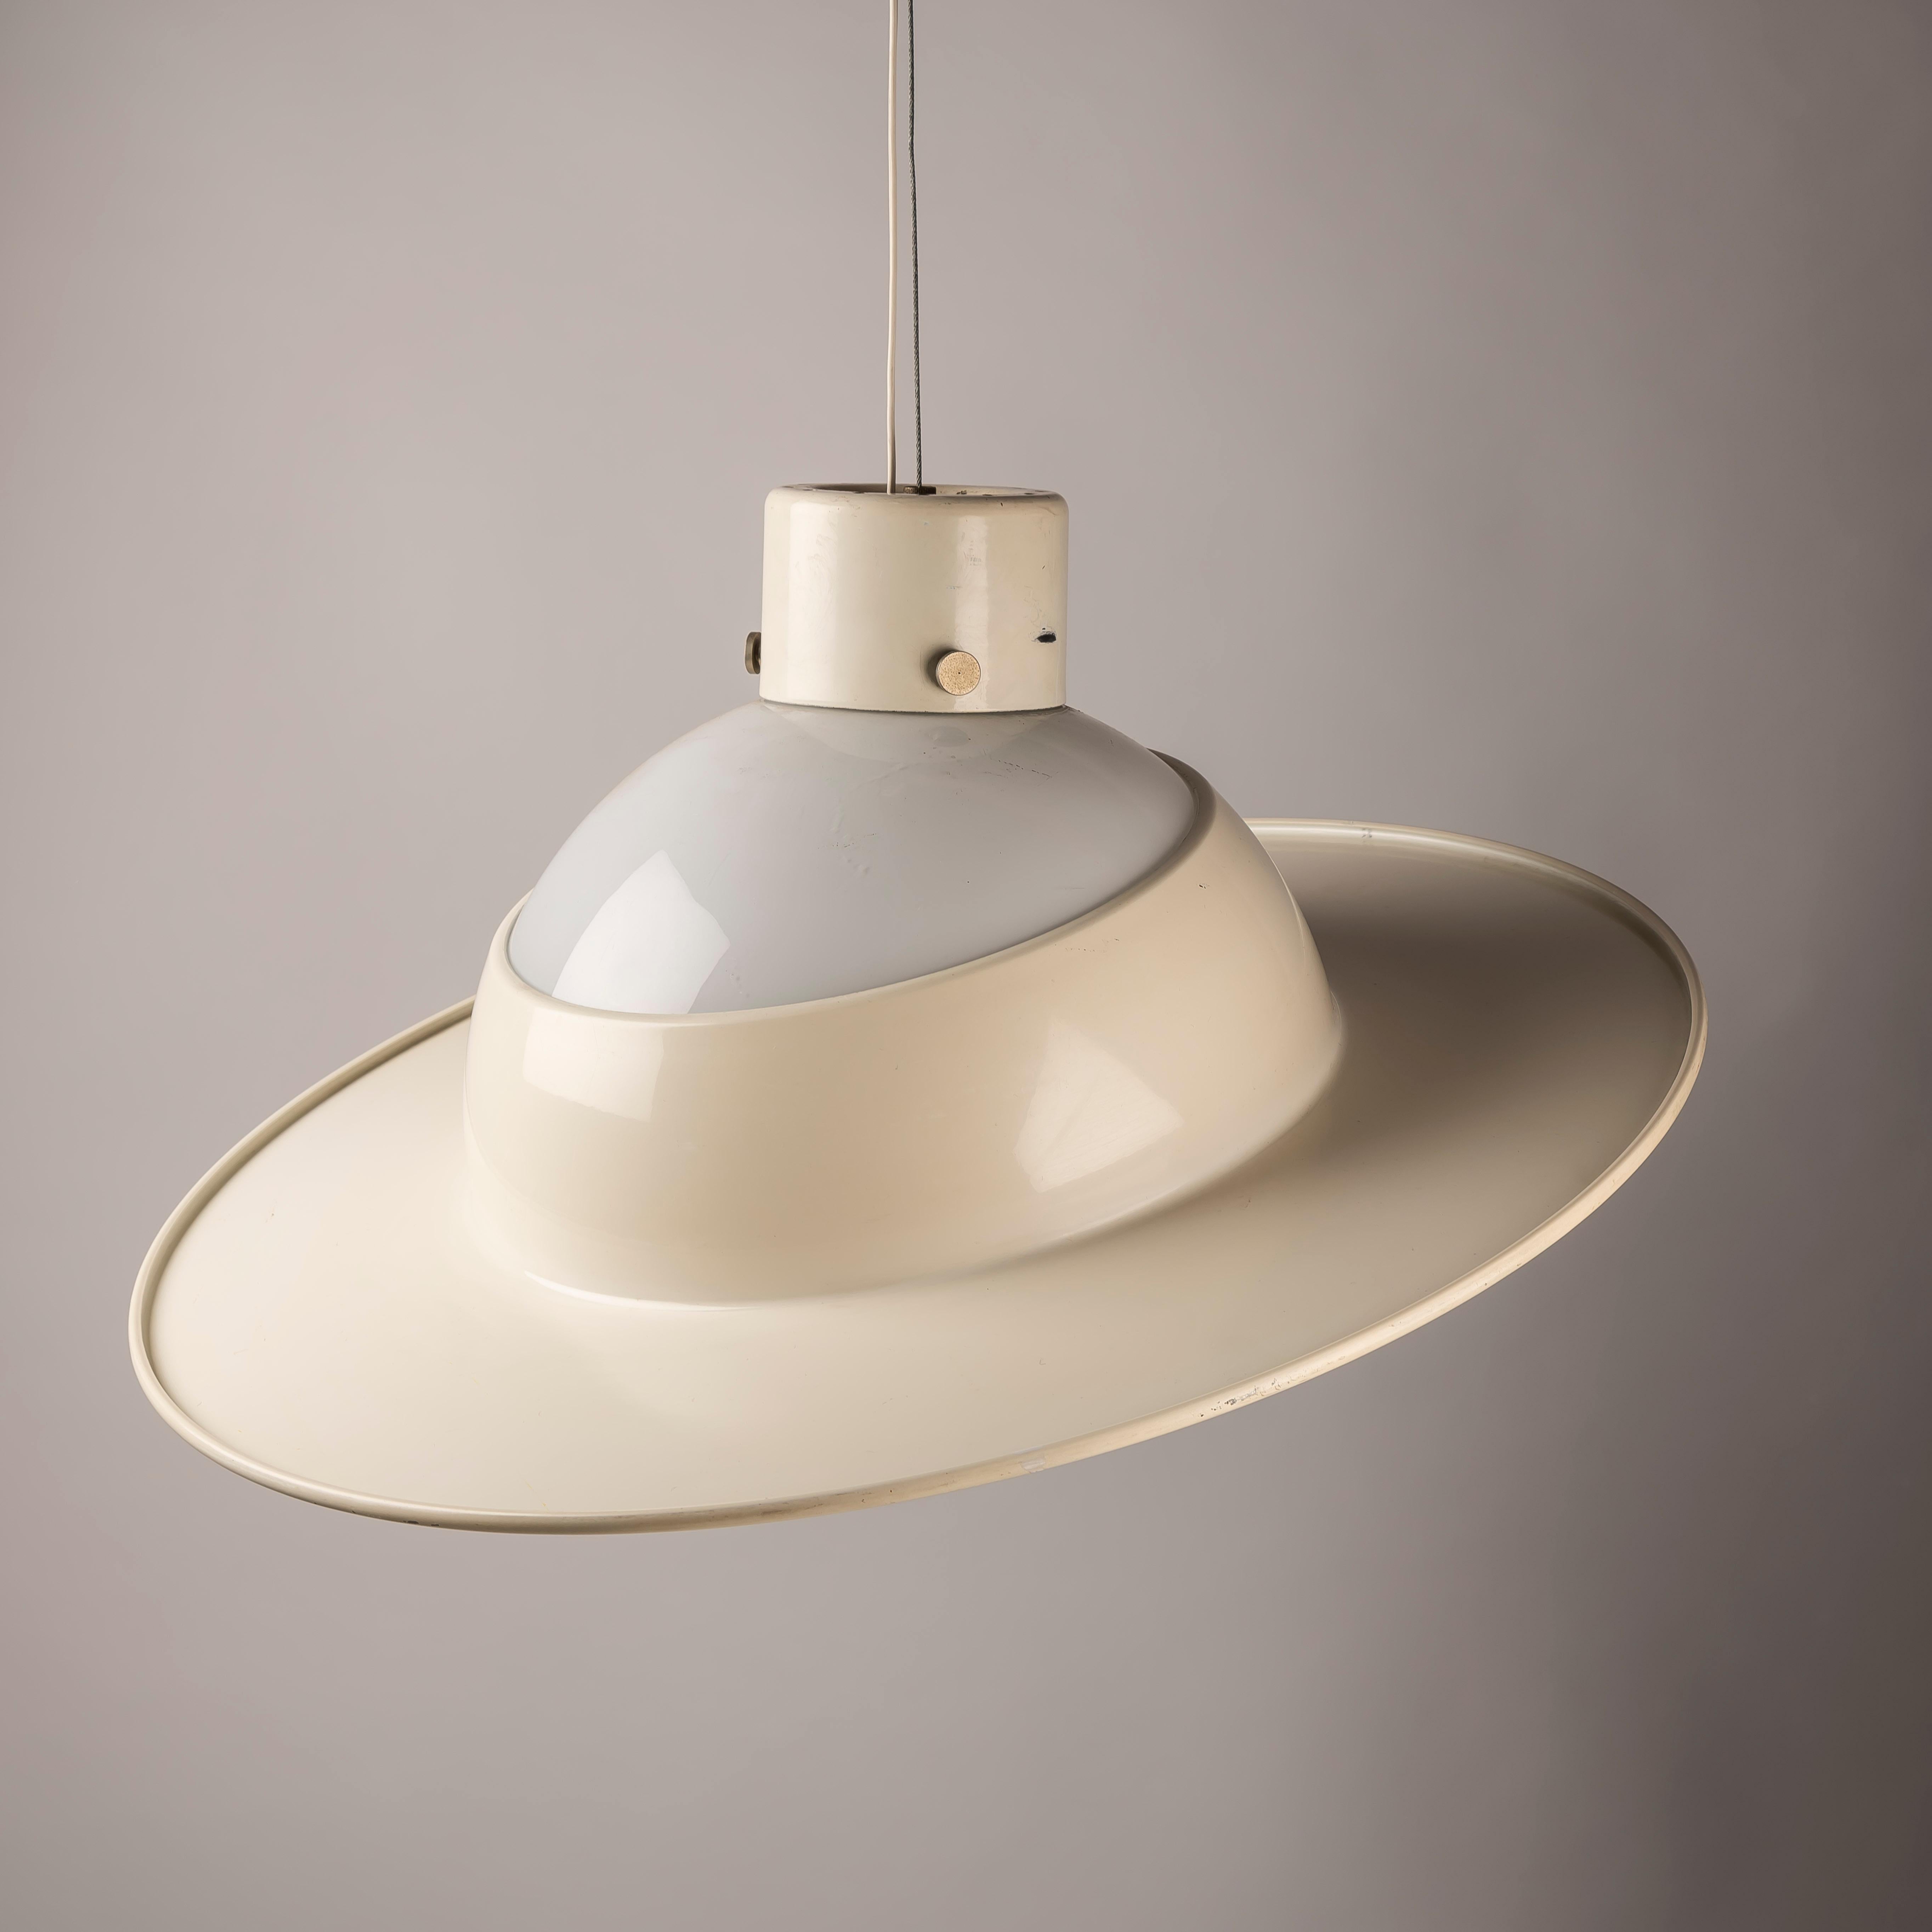 The Saturn metal and Murano glass Space Age Italian pendant lamp is a striking blend of mid-century modern design and artisanal craftsmanship, making it a perfect addition to any contemporary or vintage-inspired space. Its unique Saturn ring